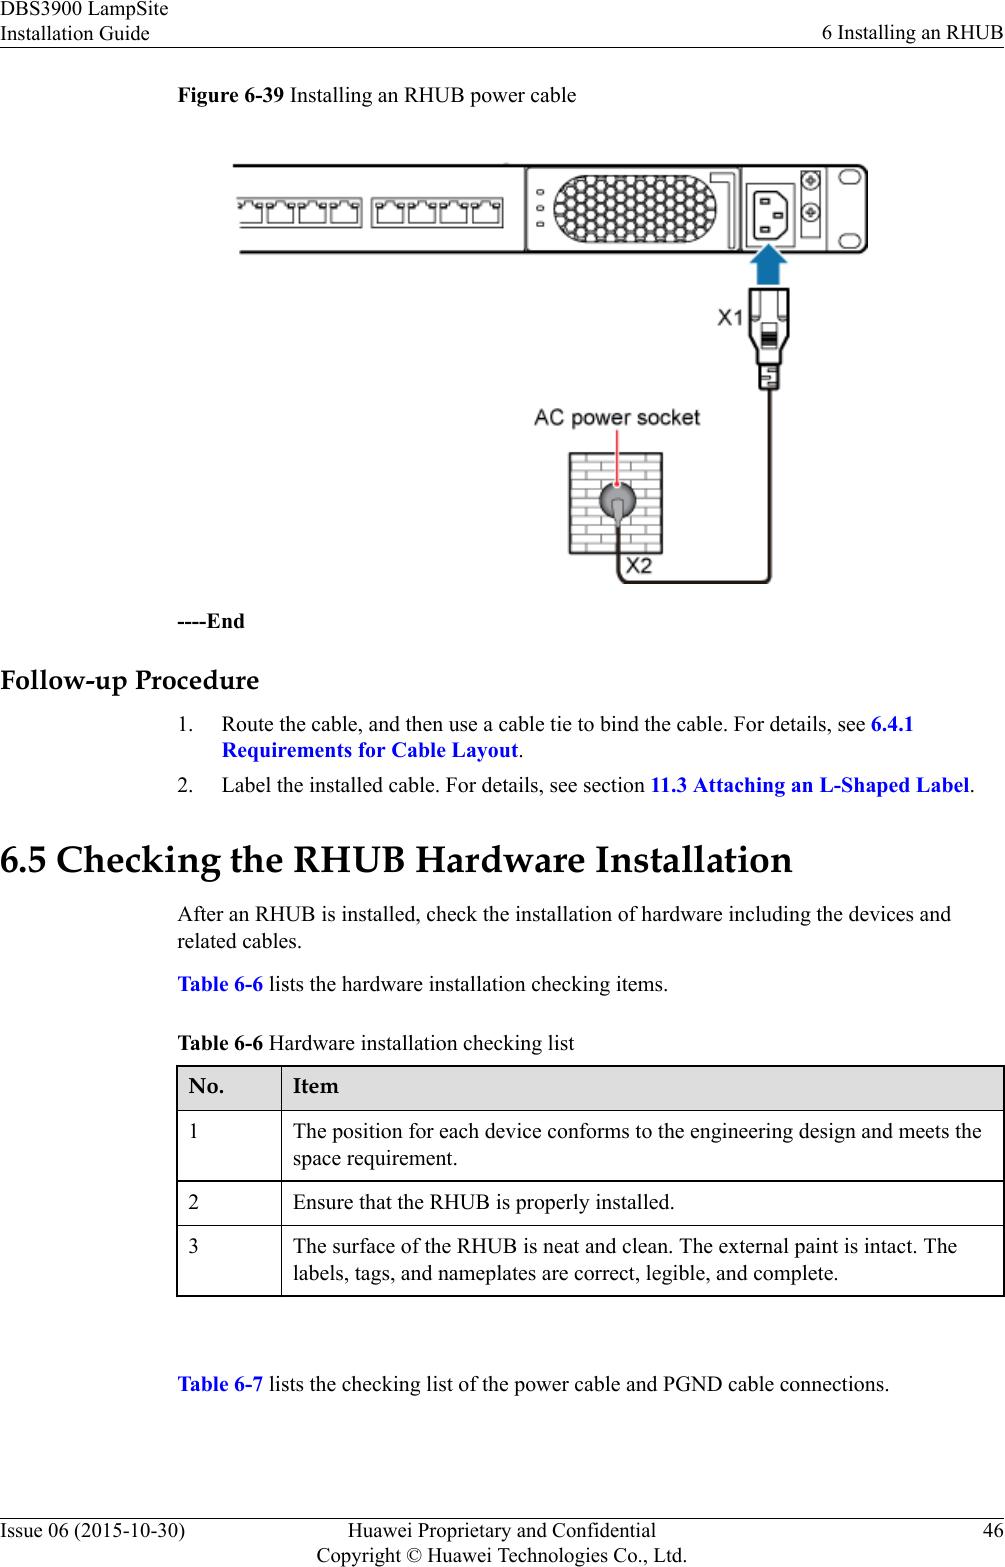 Figure 6-39 Installing an RHUB power cable----EndFollow-up Procedure1. Route the cable, and then use a cable tie to bind the cable. For details, see 6.4.1Requirements for Cable Layout.2. Label the installed cable. For details, see section 11.3 Attaching an L-Shaped Label.6.5 Checking the RHUB Hardware InstallationAfter an RHUB is installed, check the installation of hardware including the devices andrelated cables.Table 6-6 lists the hardware installation checking items.Table 6-6 Hardware installation checking listNo. Item1 The position for each device conforms to the engineering design and meets thespace requirement.2 Ensure that the RHUB is properly installed.3 The surface of the RHUB is neat and clean. The external paint is intact. Thelabels, tags, and nameplates are correct, legible, and complete. Table 6-7 lists the checking list of the power cable and PGND cable connections.DBS3900 LampSiteInstallation Guide 6 Installing an RHUBIssue 06 (2015-10-30) Huawei Proprietary and ConfidentialCopyright © Huawei Technologies Co., Ltd.46